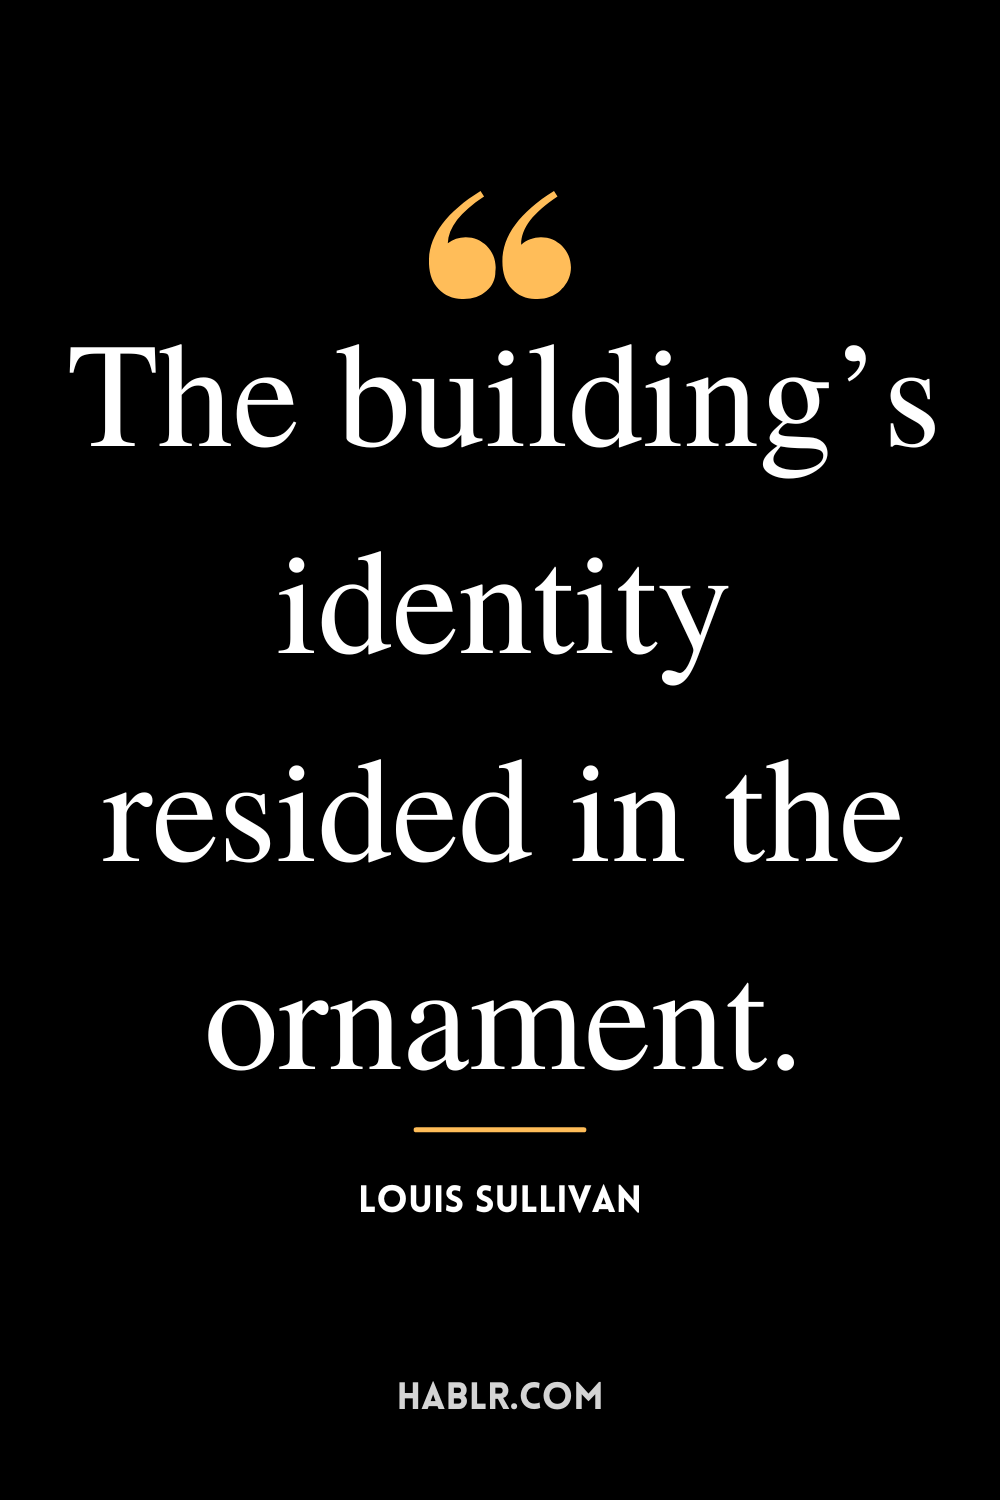 “The building’s identity resided in the ornament.” -Louis Sullivan